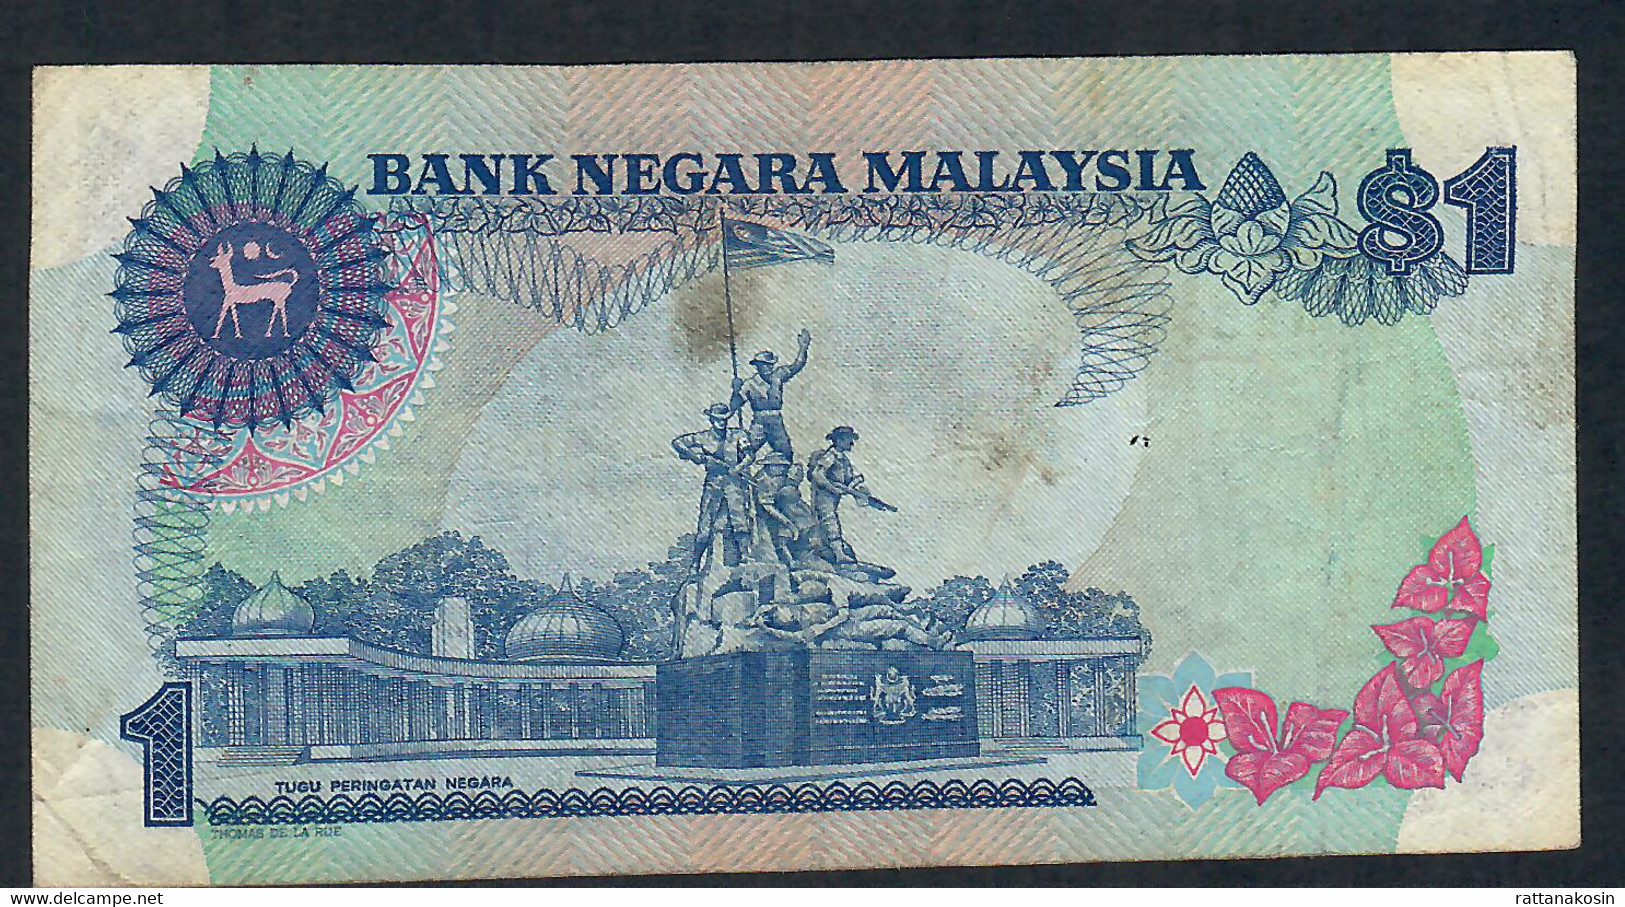 MALAYSIA  P19A 1 RINGGIT 1981 #AF  Printer TdlR RARE VARIETY  FINE++/Better  NO P.h.  ! ! - Maleisië